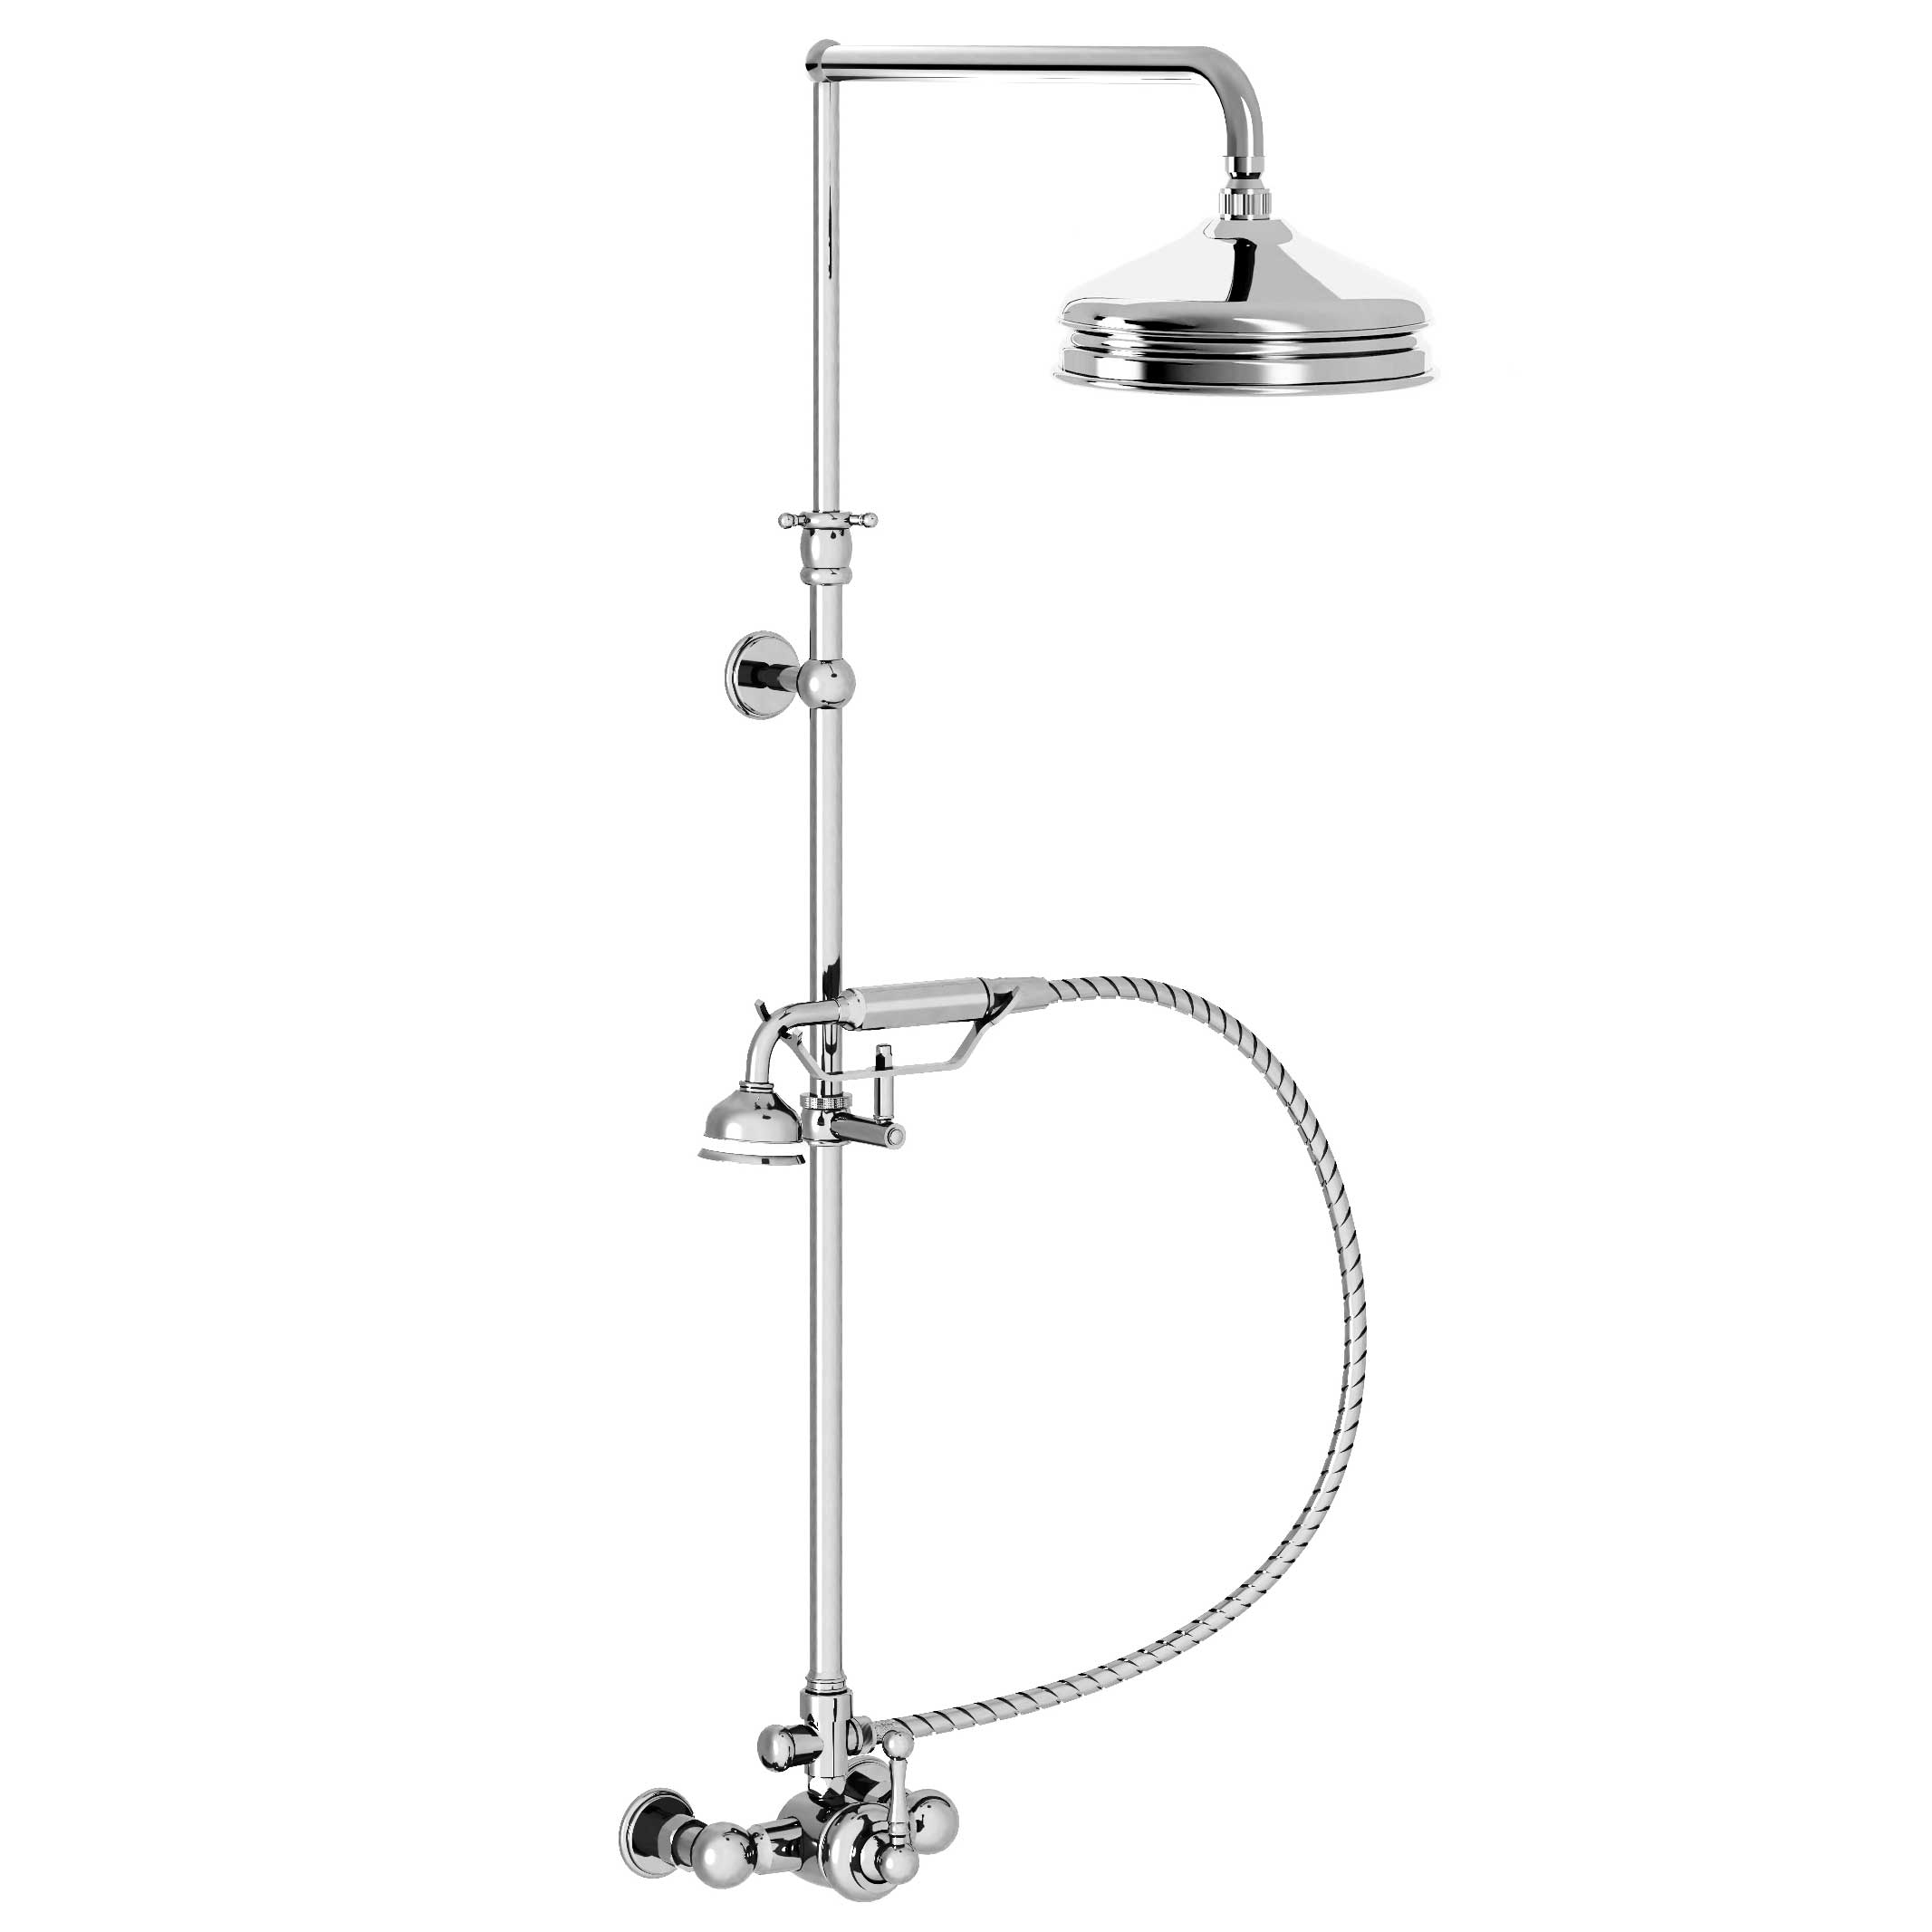 M40-2204M Single-lever shower mixer with column, anti-scaling